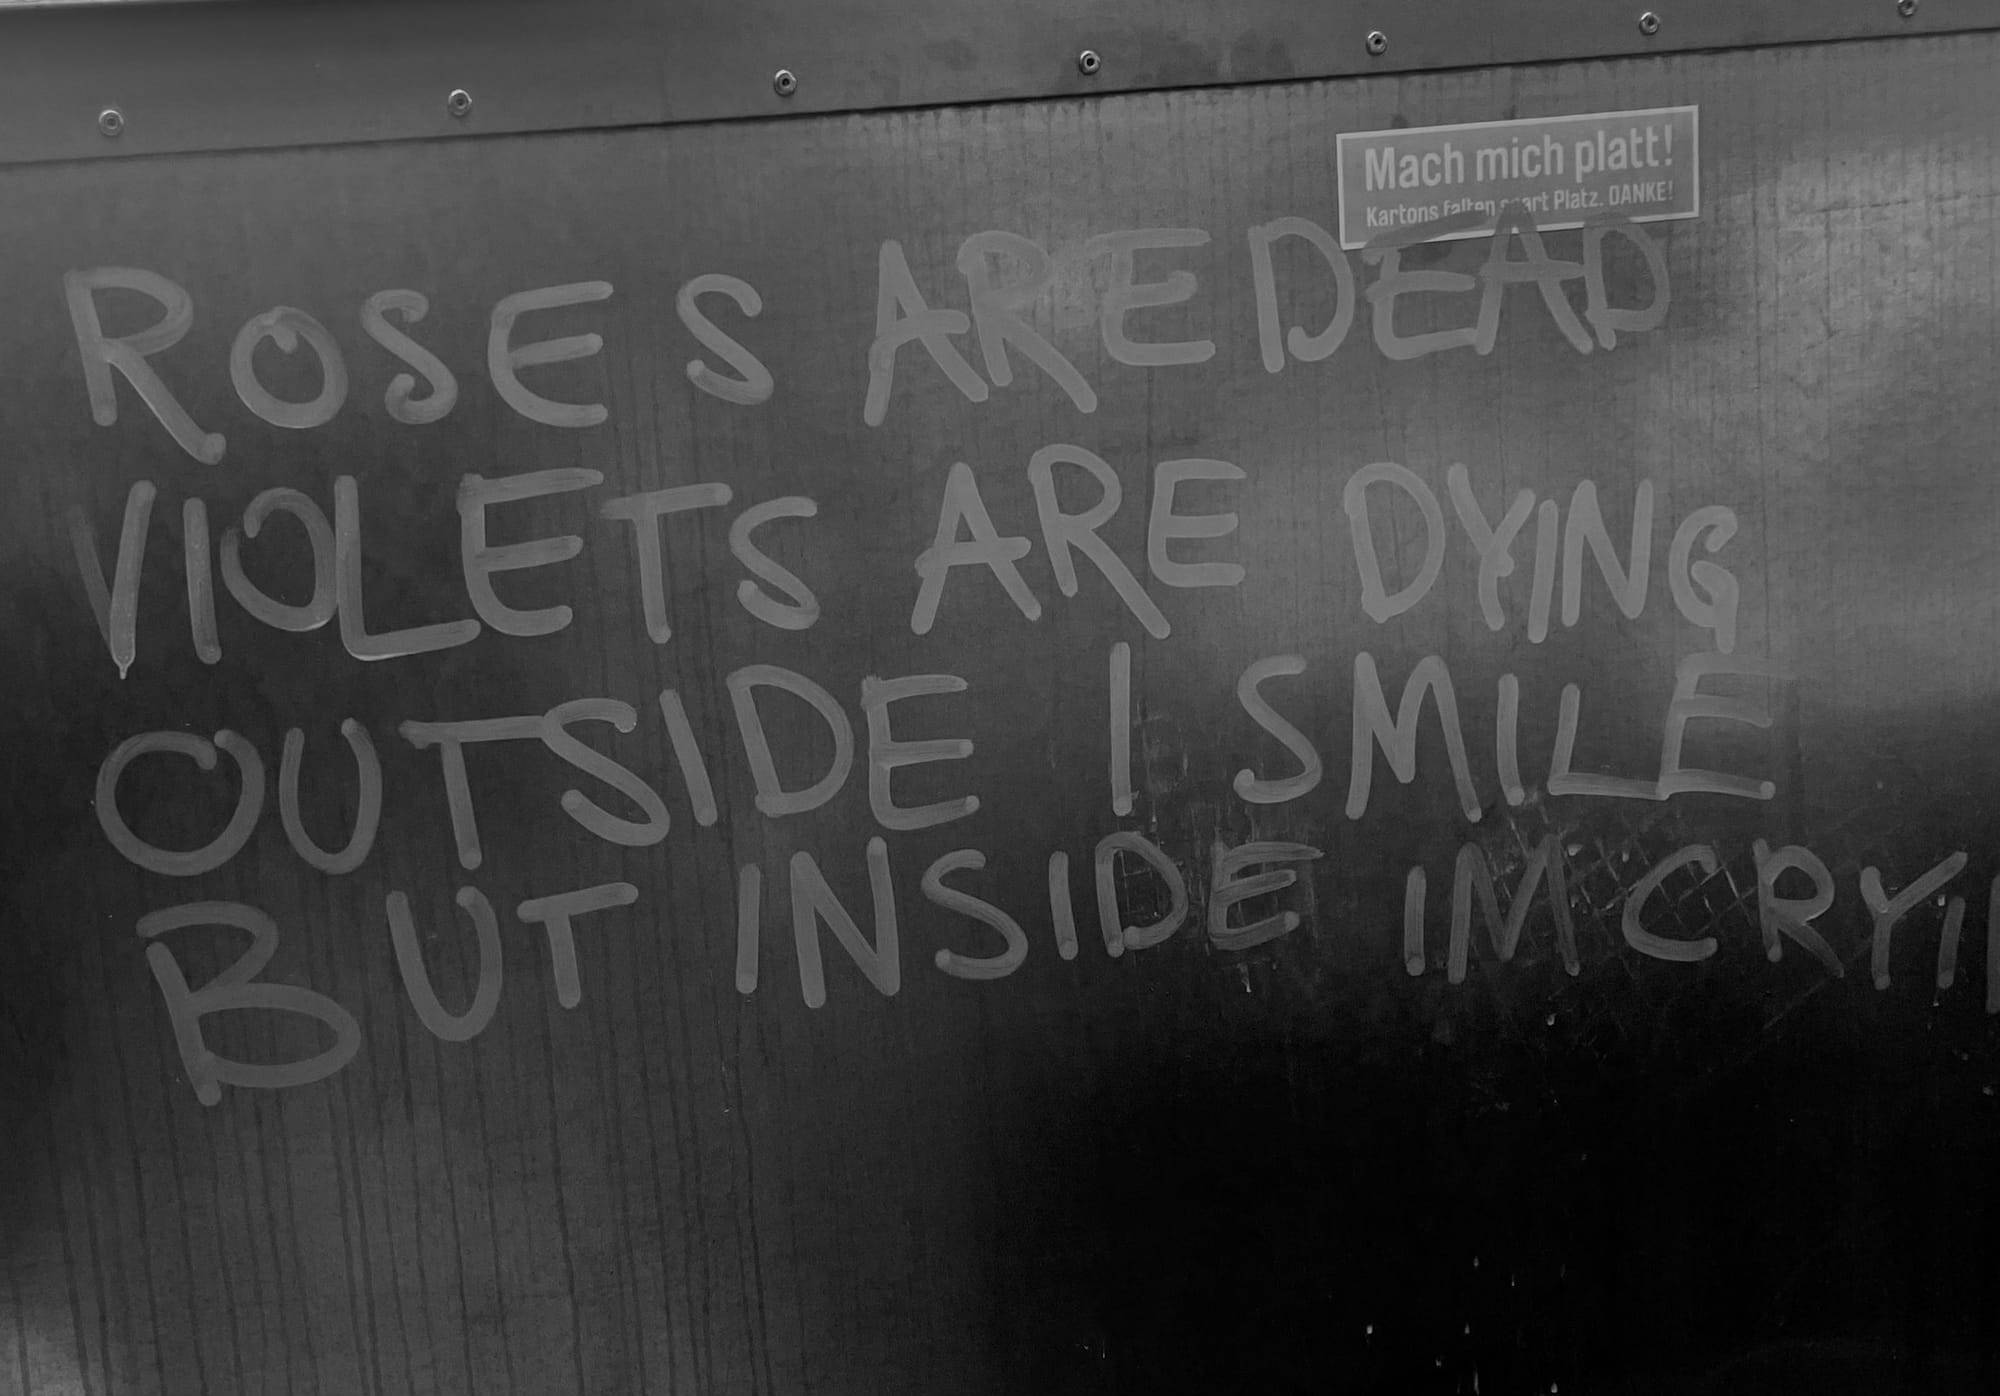 An einem Container steht: Roses are dead Violets are dying Outside I smile But inside I‘m crying